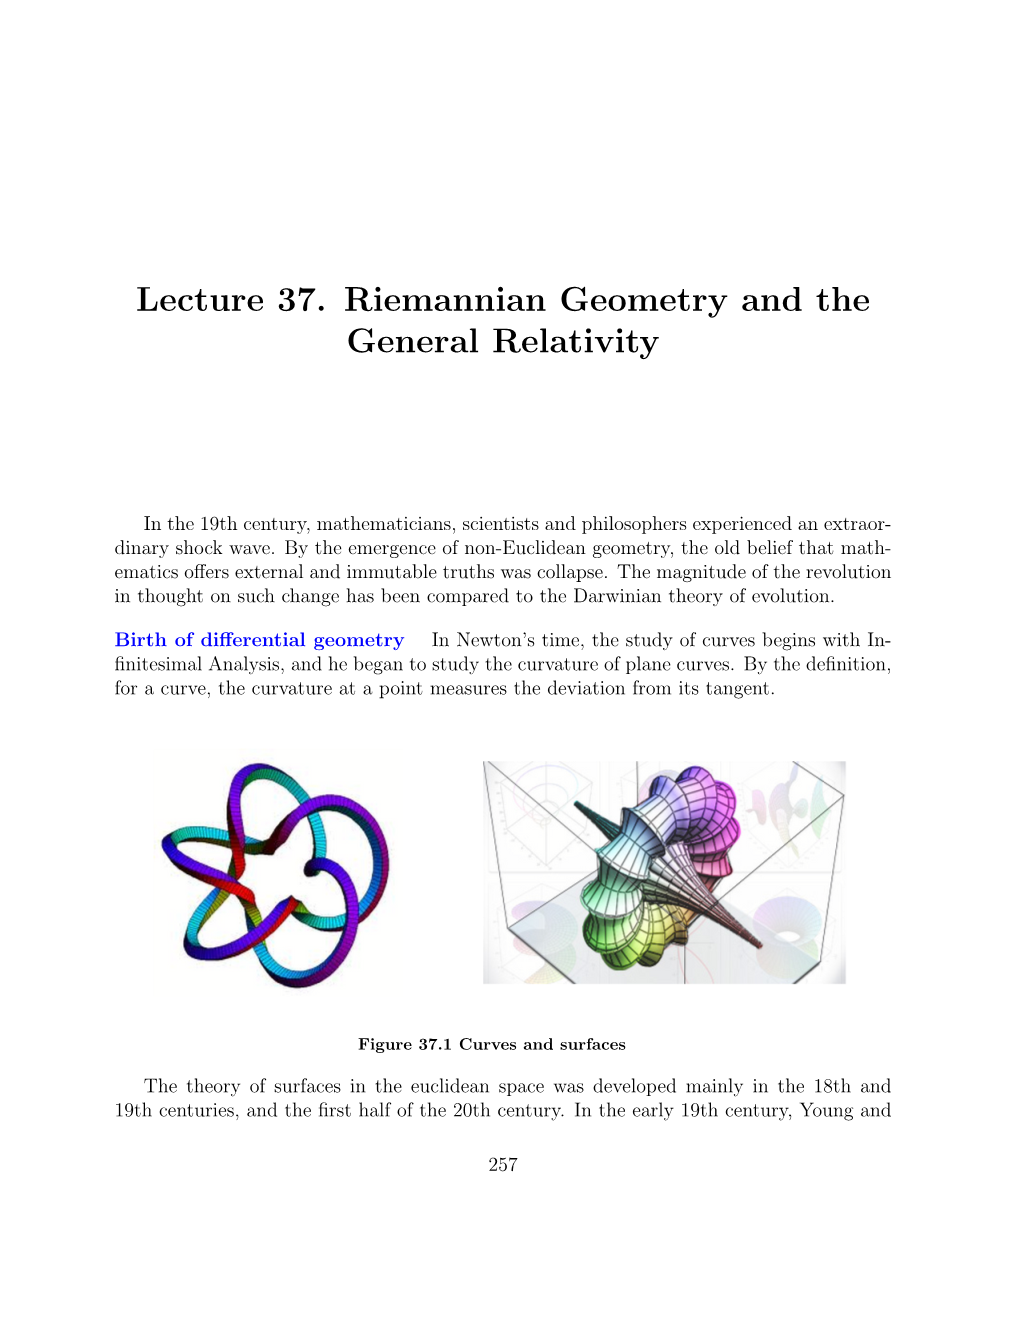 Lecture 37. Riemannian Geometry and the General Relativity